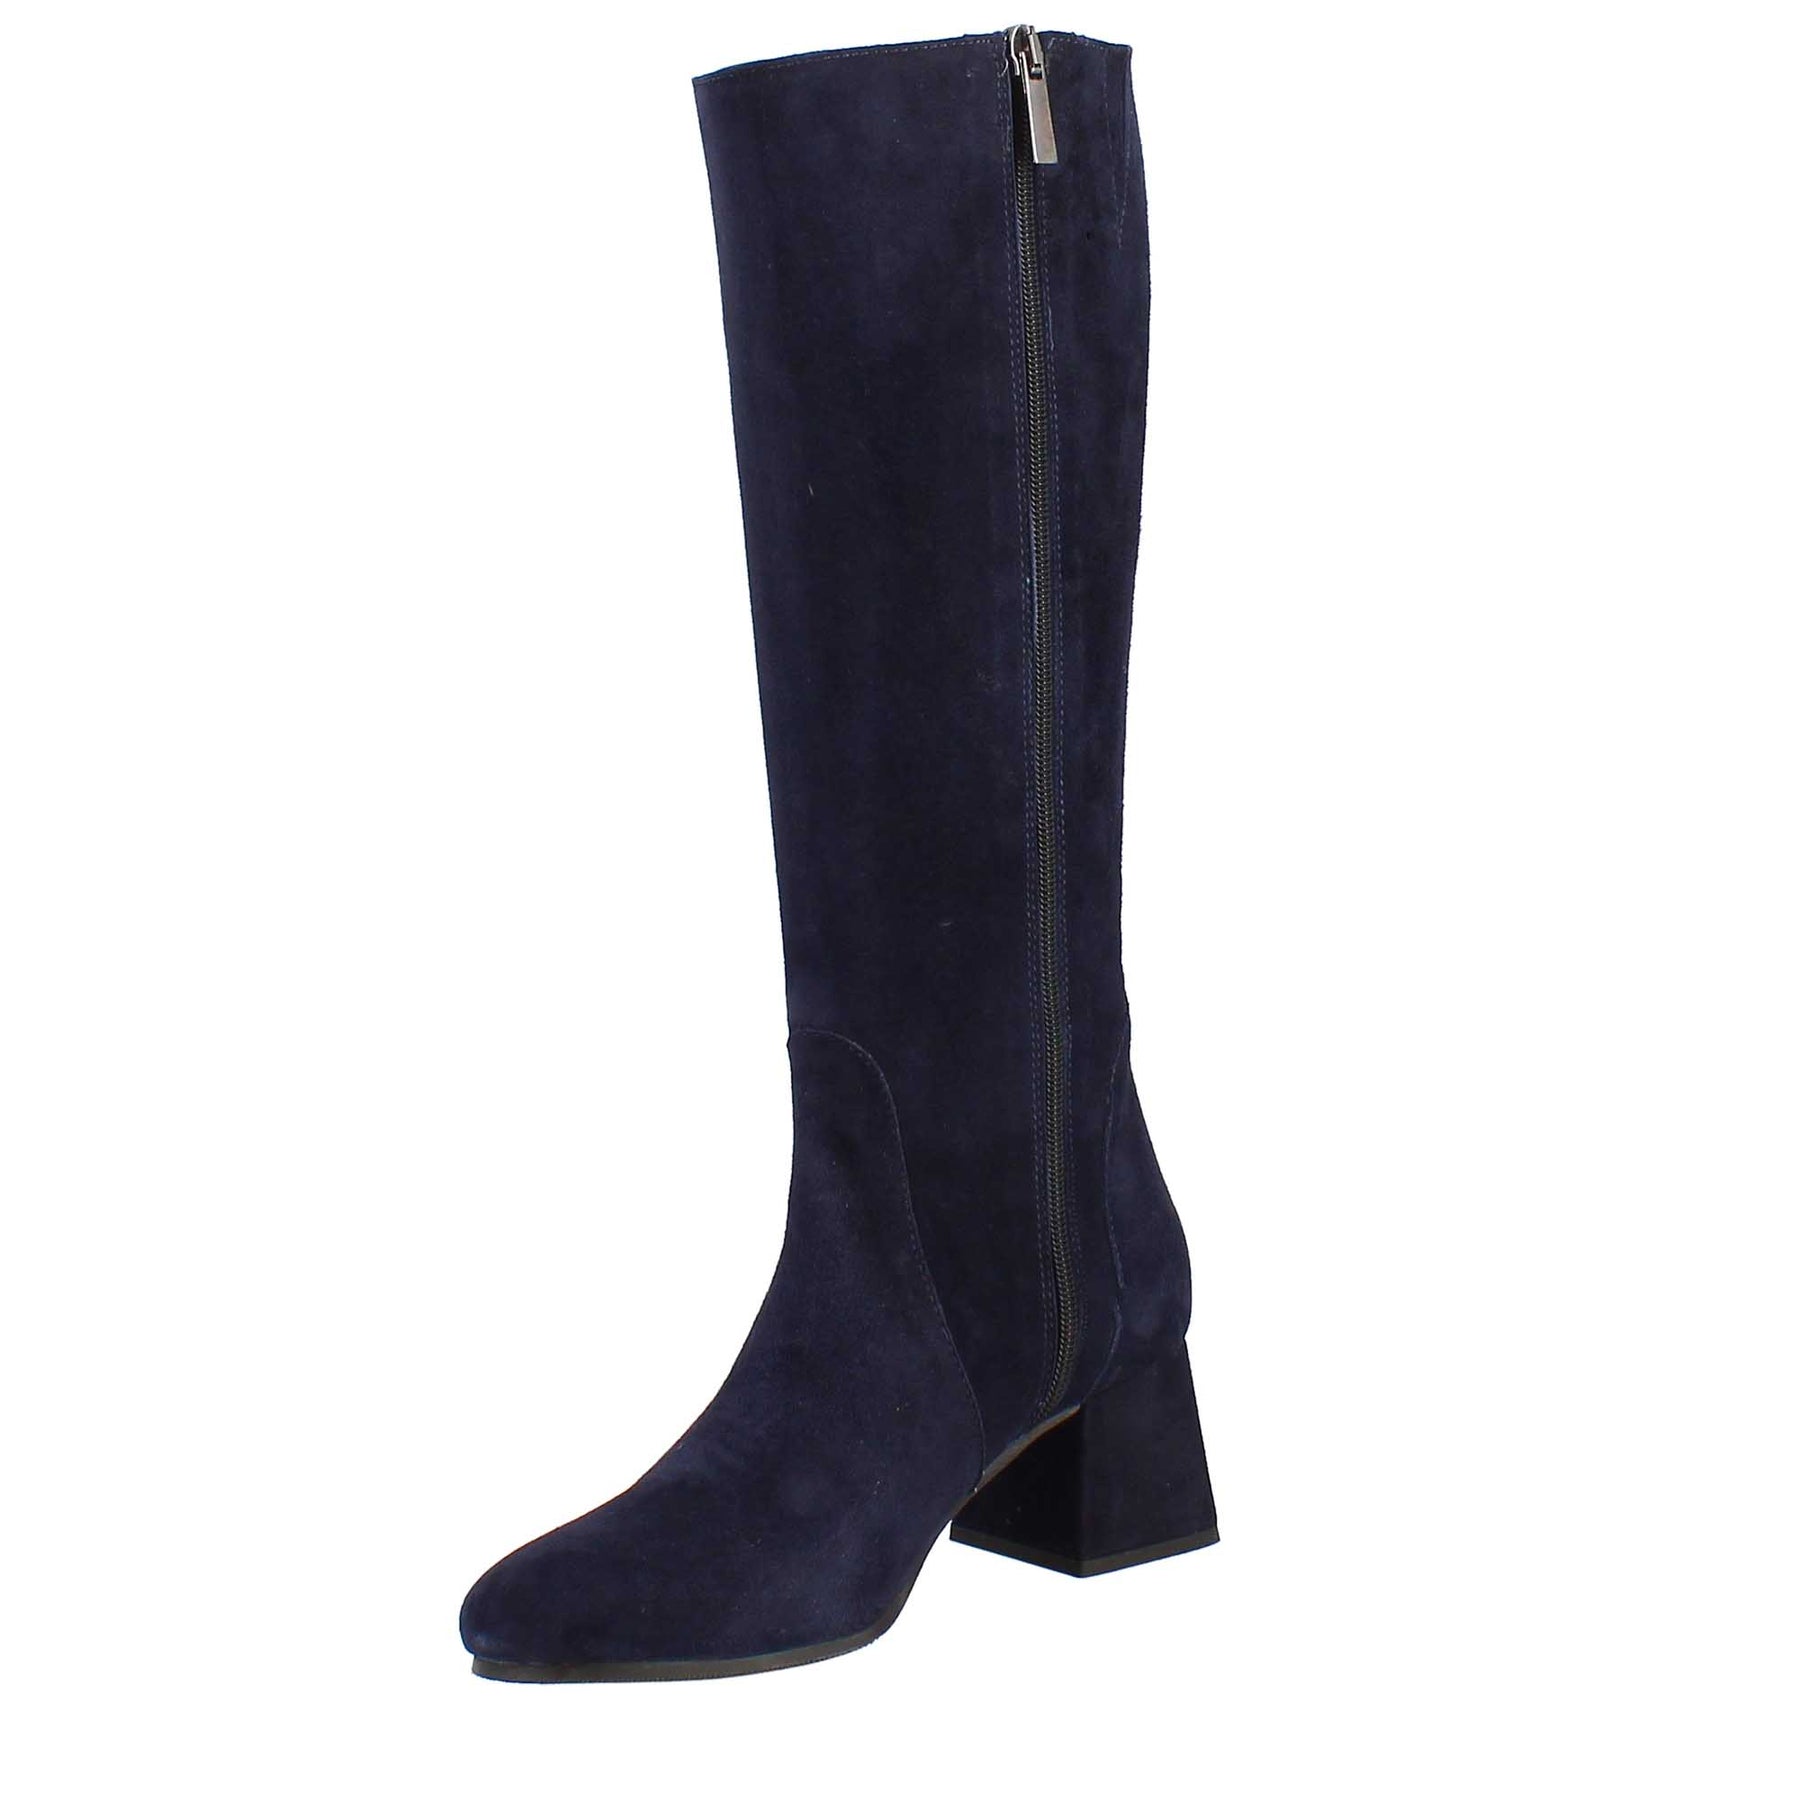 Women's high boots in blue suede